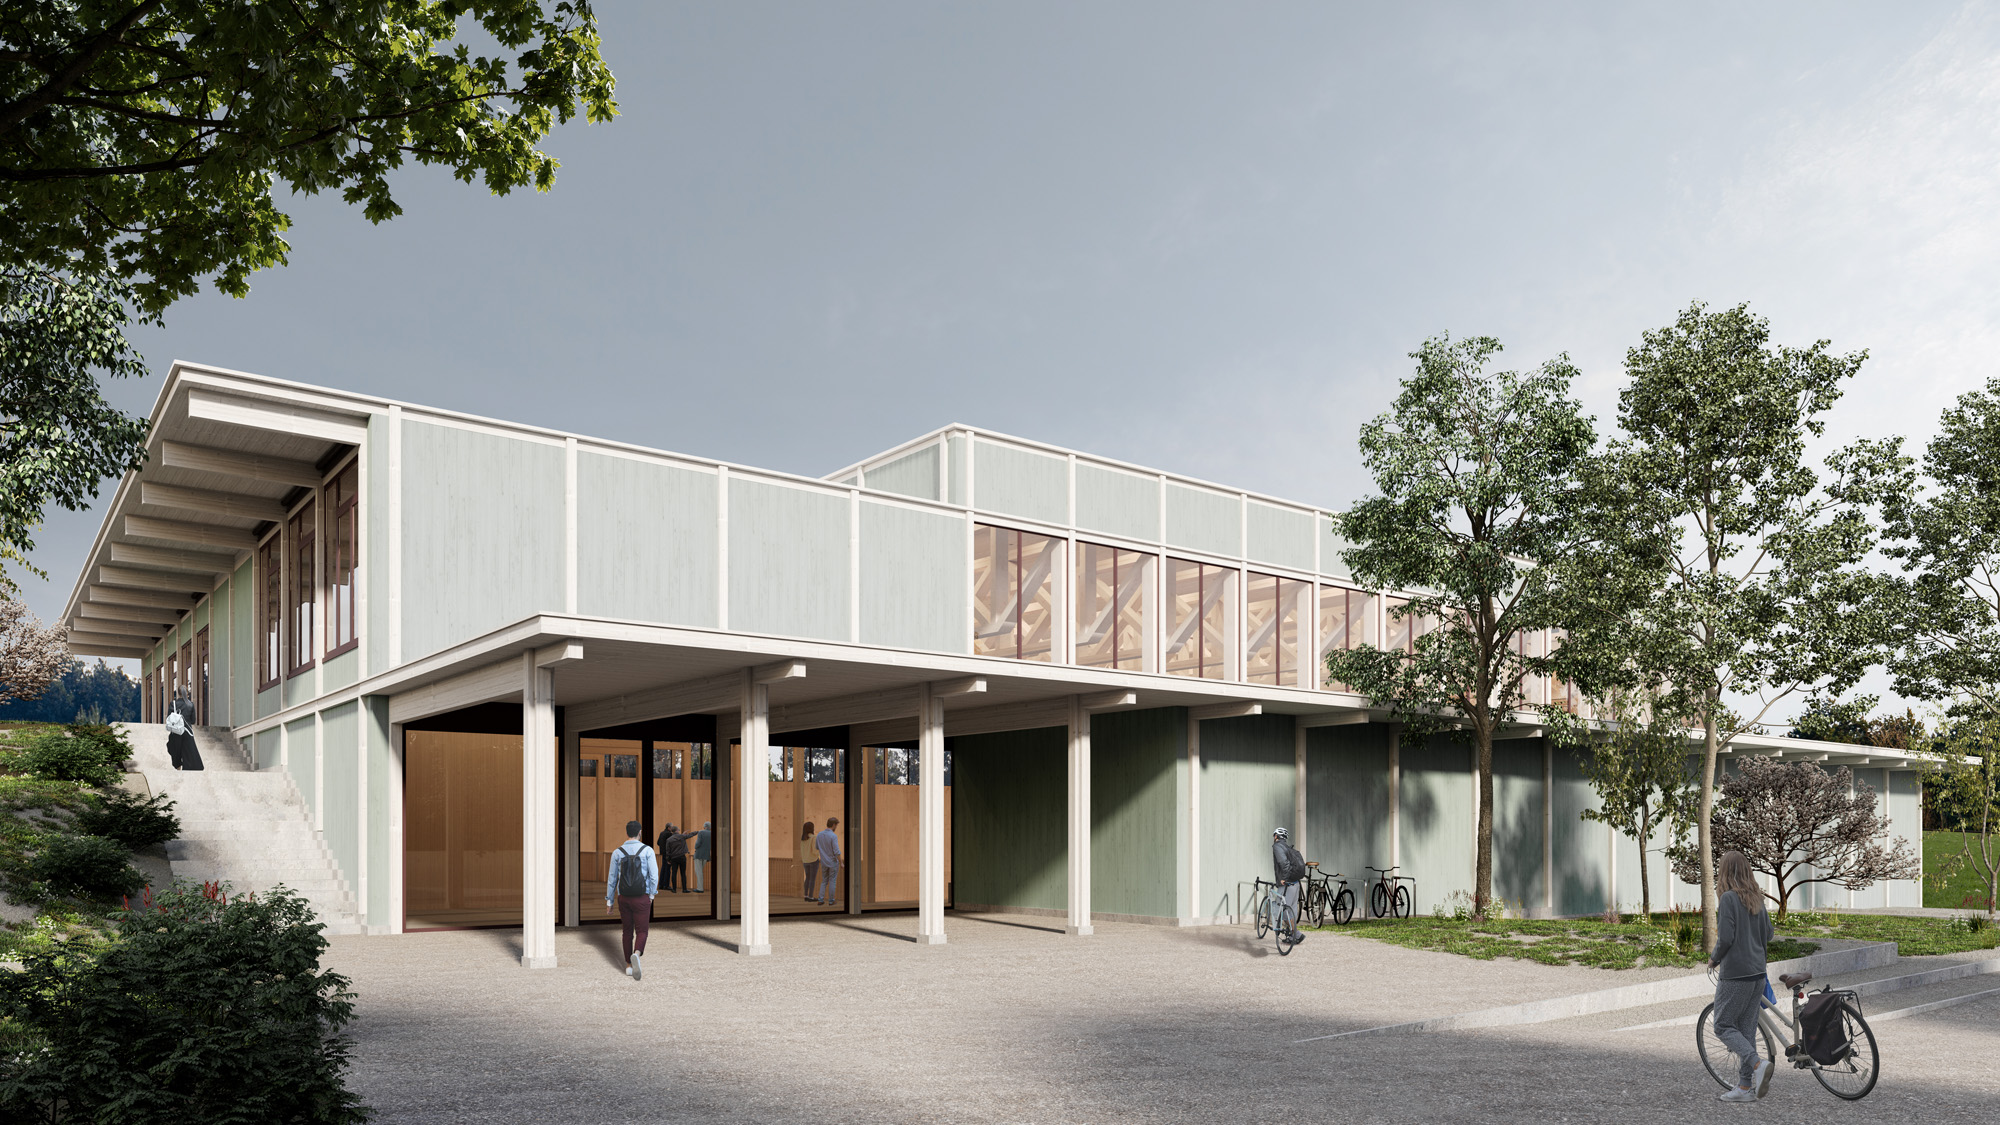 Competition image for a sport hall in Oberlunkhofen by DS ARCHITEKTEN 4th place.